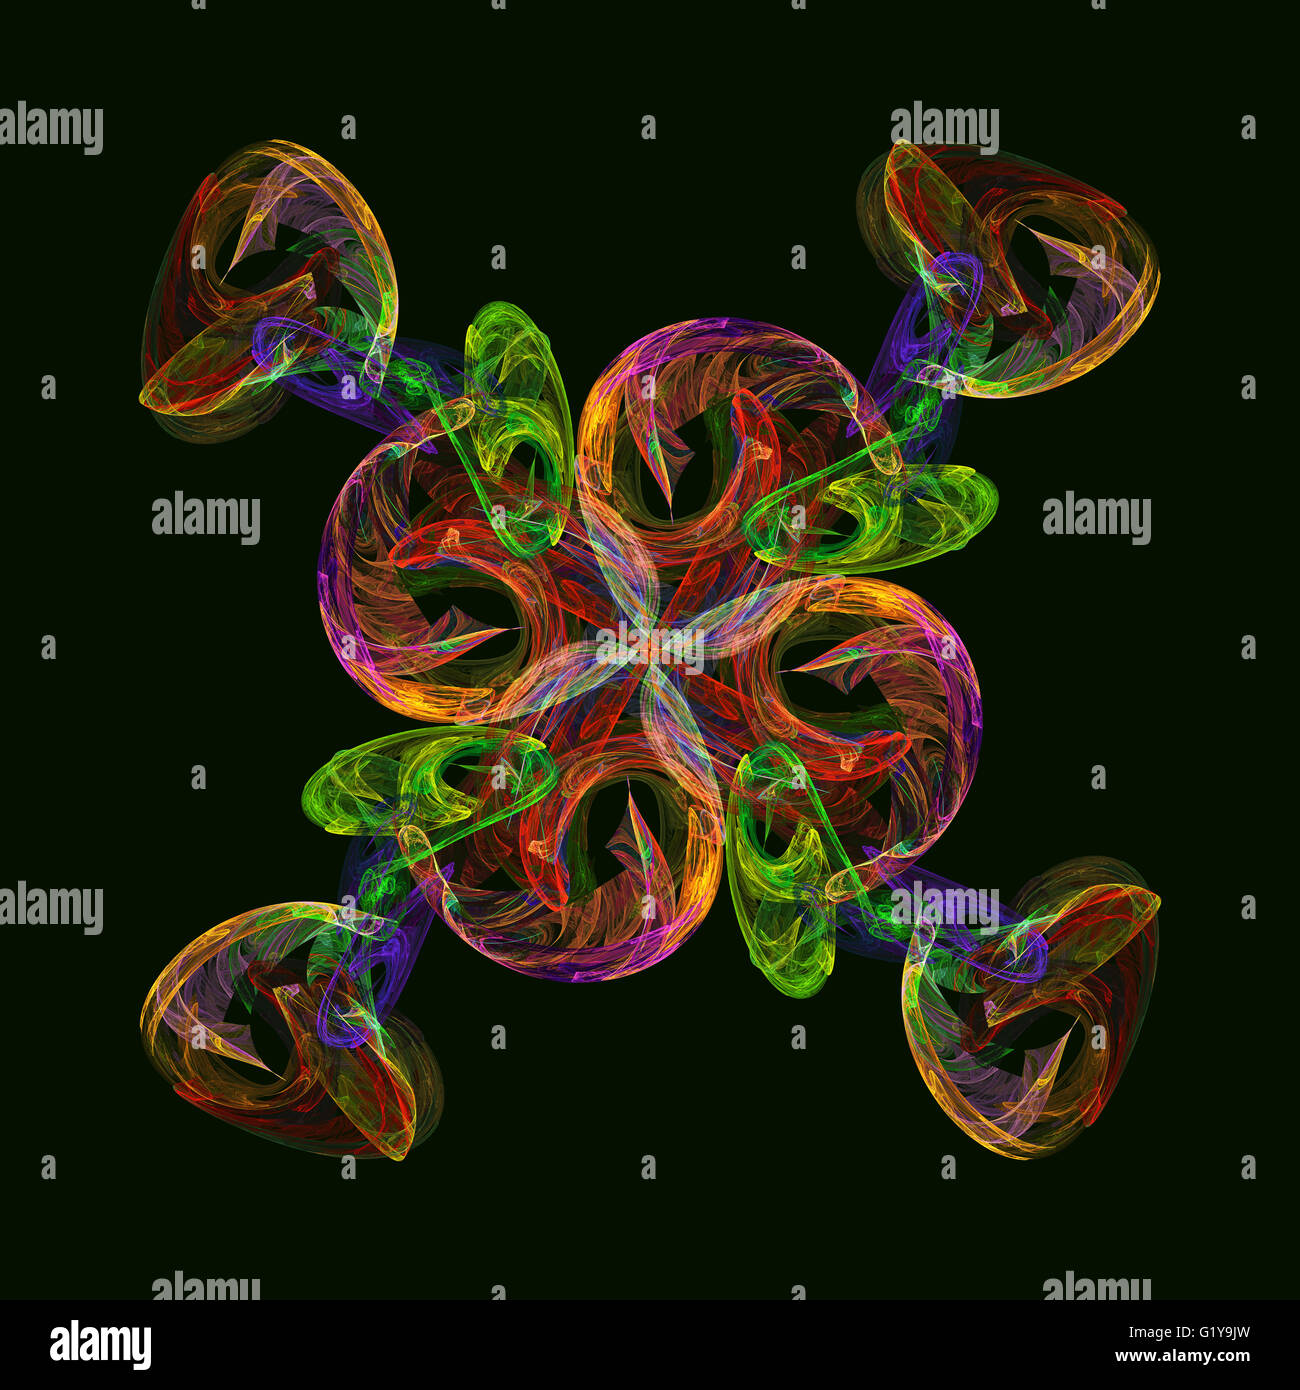 Abstract fractal swirl in bright neon colors on dark green background Stock Photo